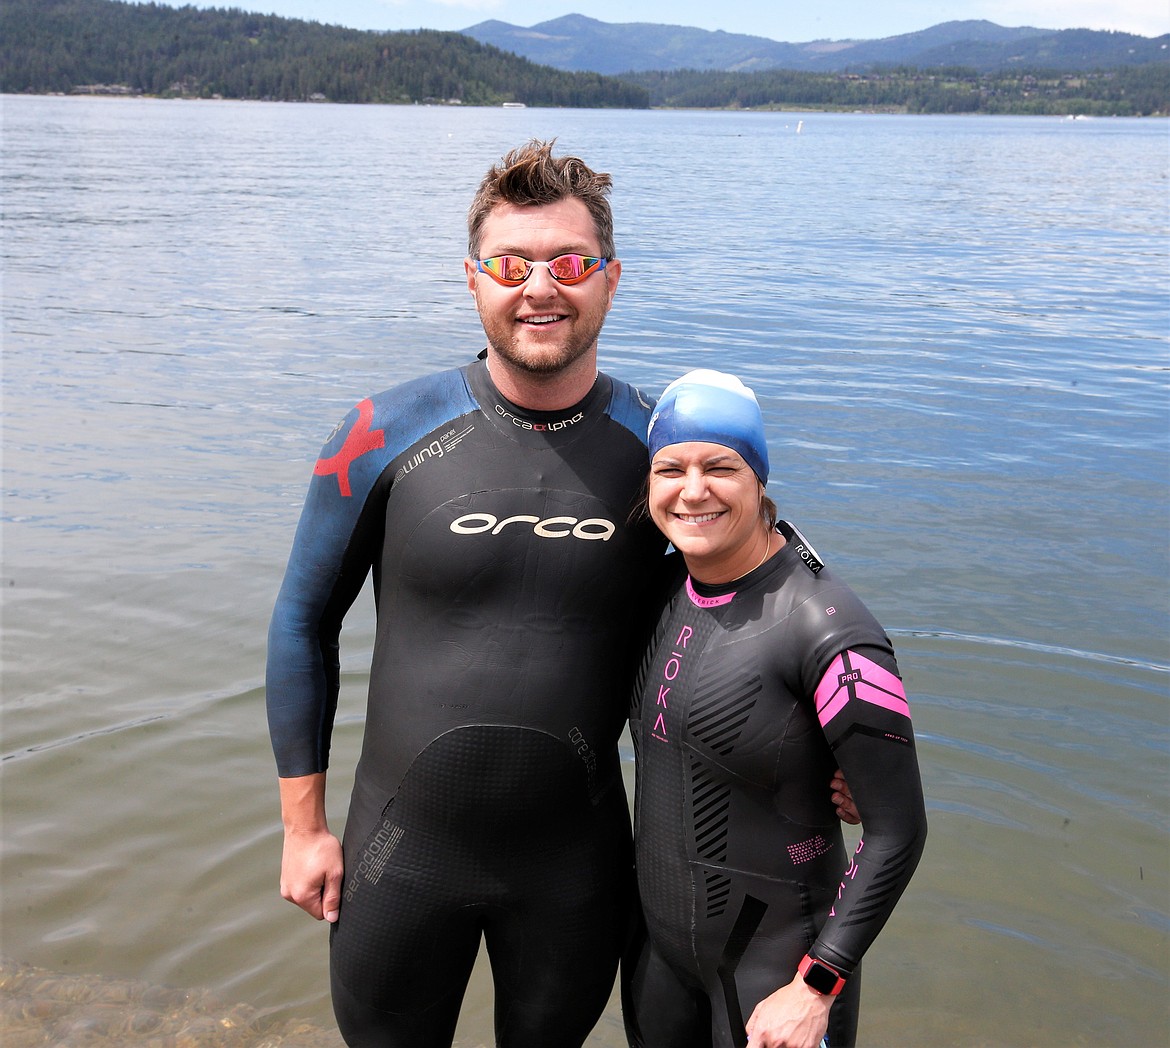 Greg Lowhorn and sister Christina Lowhorn get ready to swim in Lake Coeur d'Alene on Friday. Both are registered for Sunday's Ironman 70.3 Coeur d'Alene.